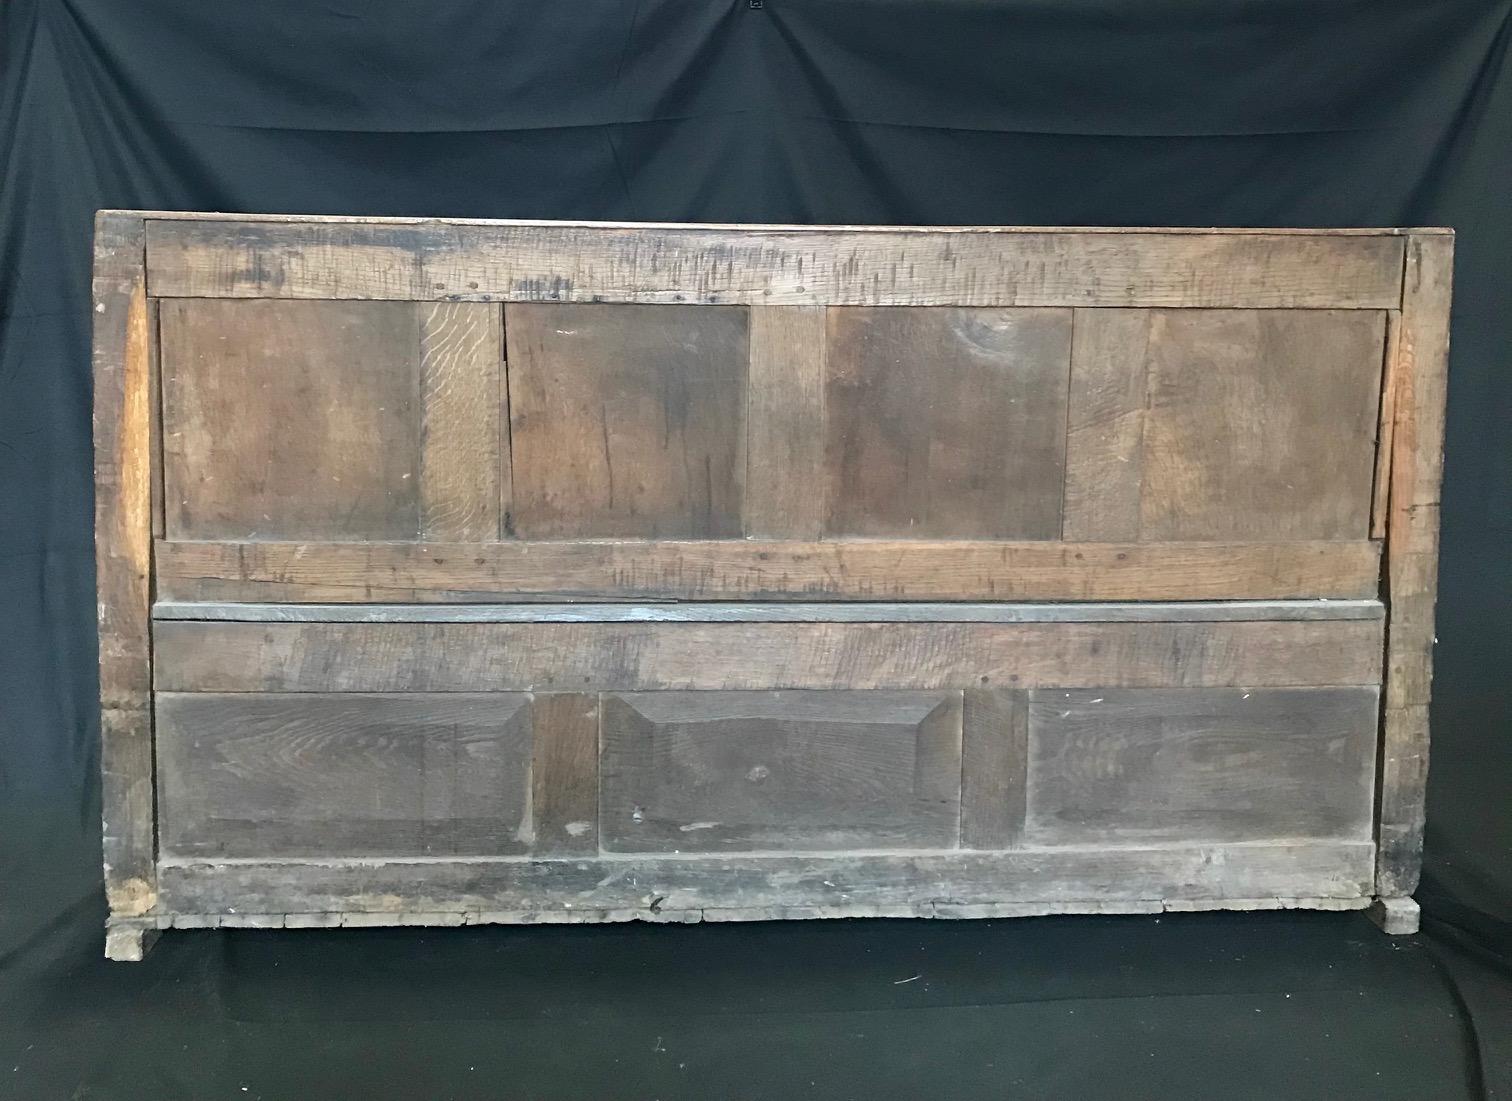 English Character Rich Very Early British Mudroom Bench with Storage under Seat